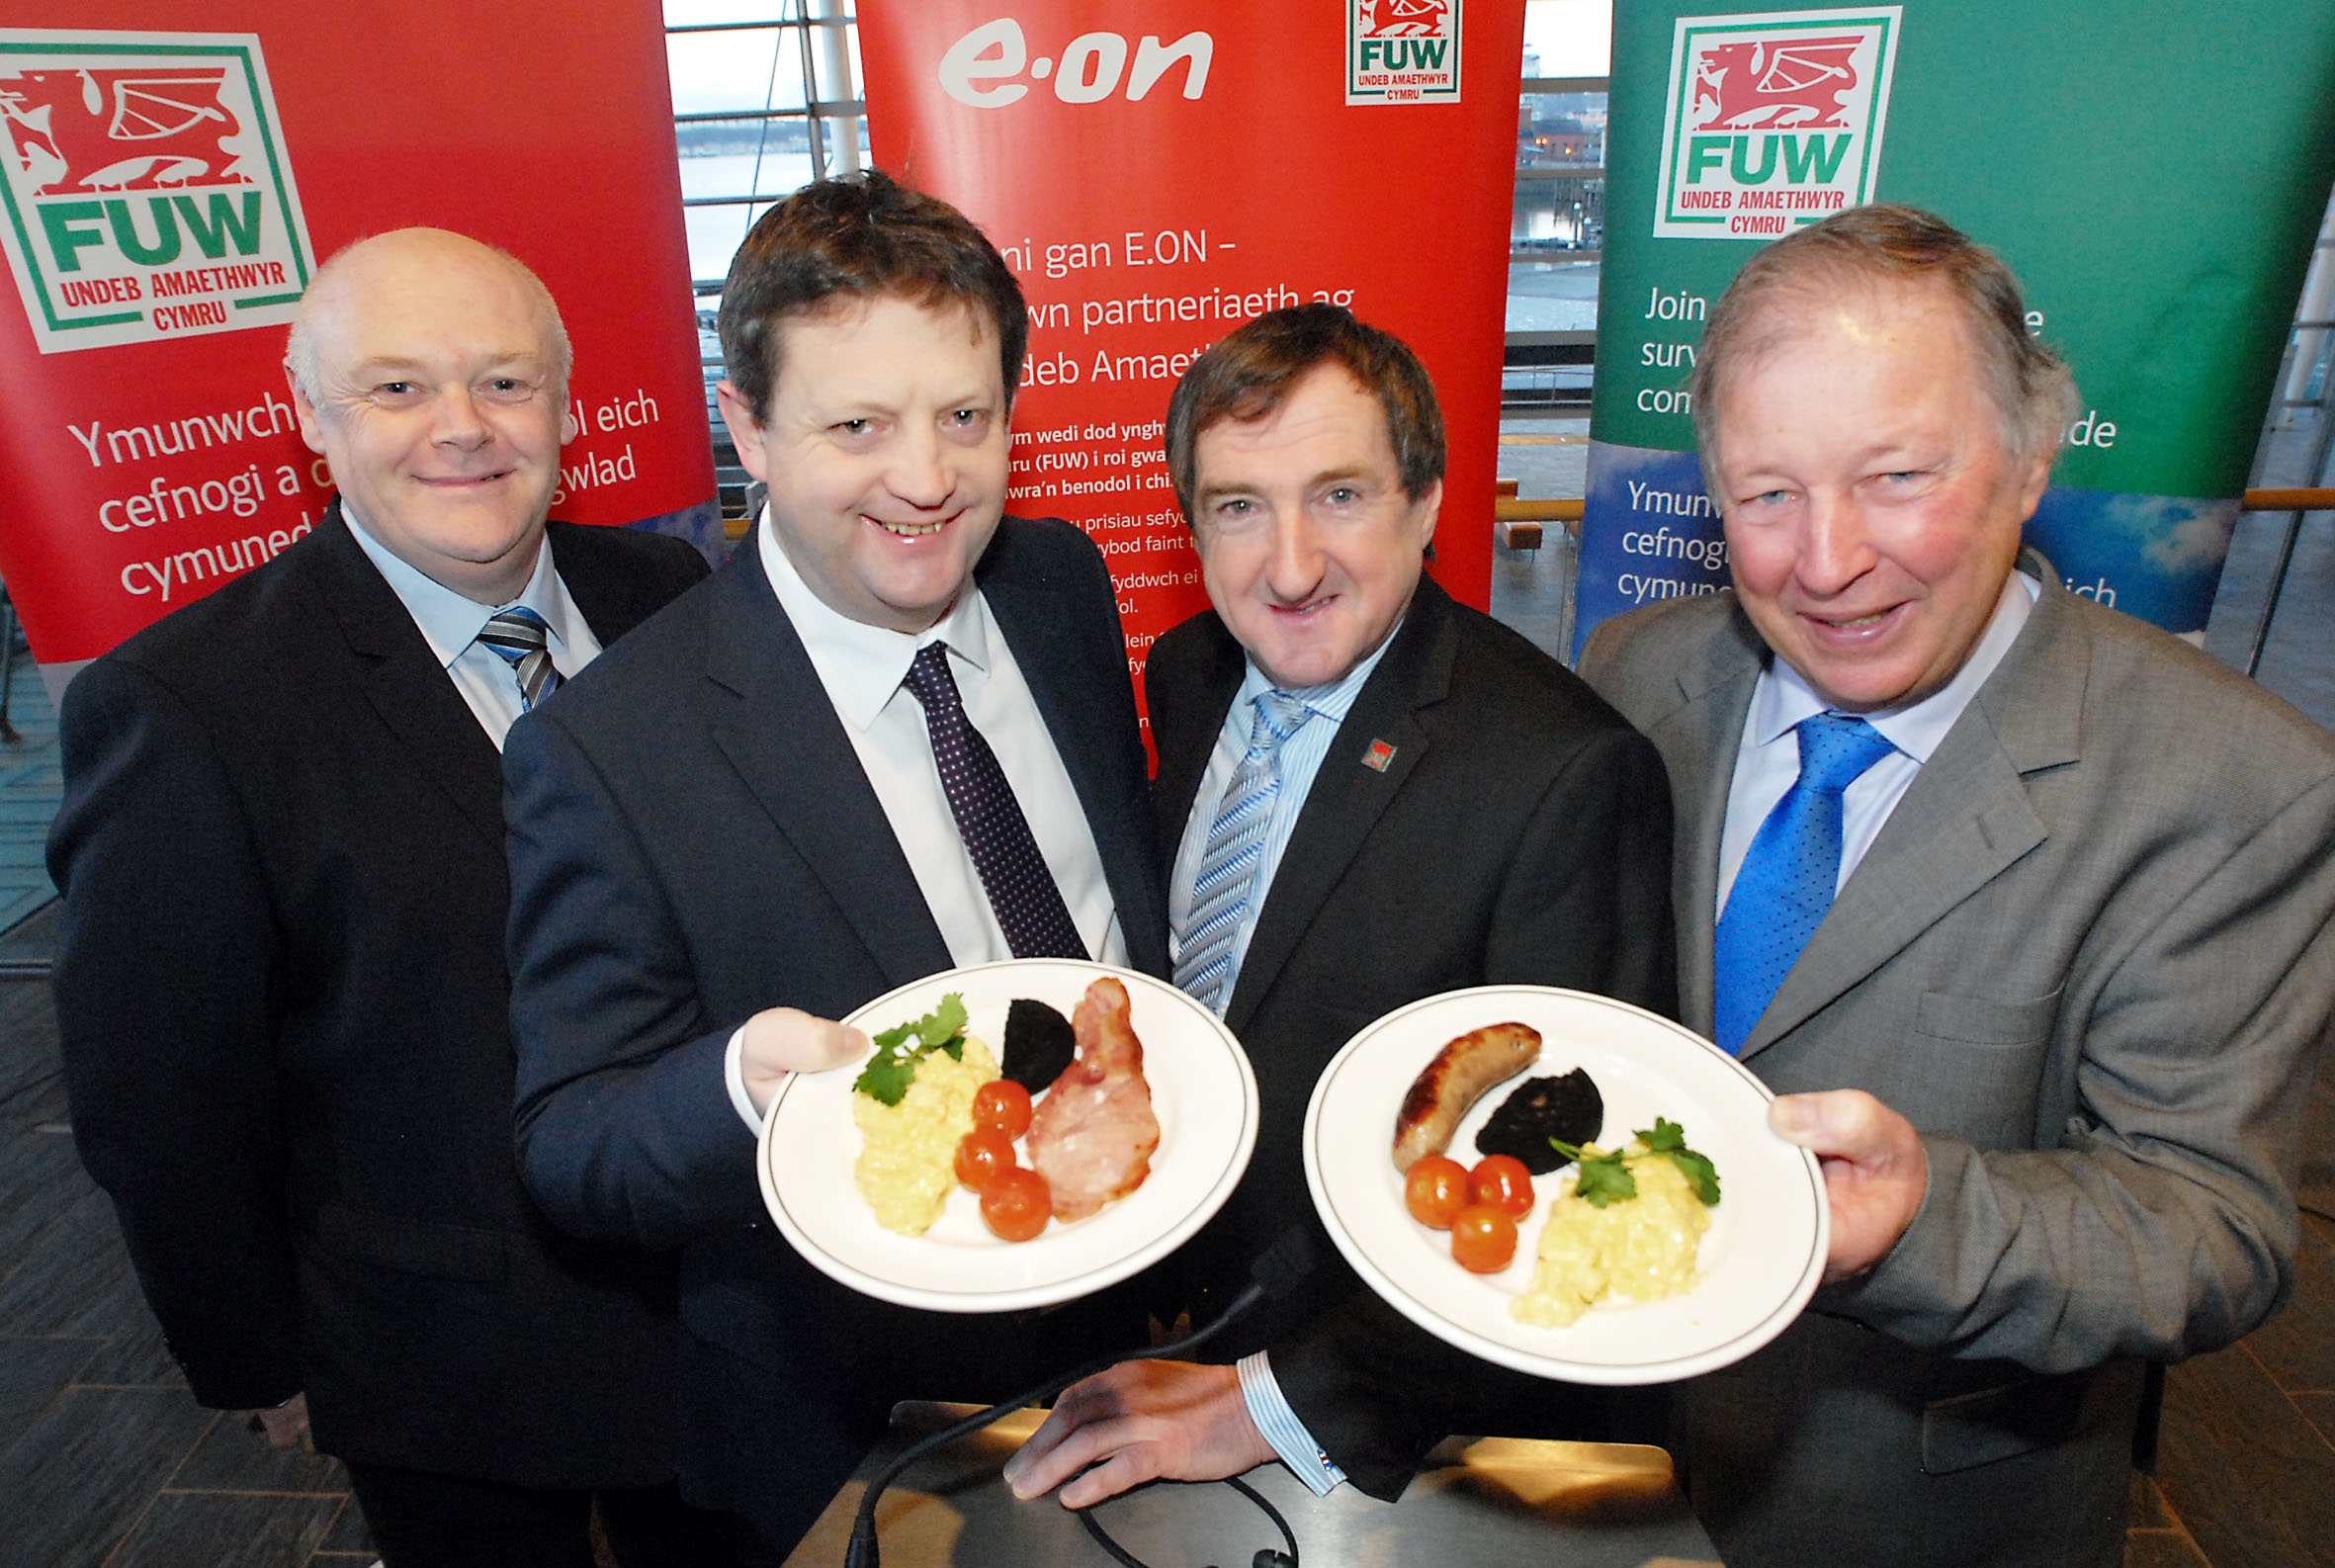 WELSH BREAKFAST: FUW president Emyr Jones (second from right) with (from left) sponsors' representatives E.ON's David Foode, natural resources and food minister Alun Davies and Hybu Cig Cymru chairman Dai Davies.